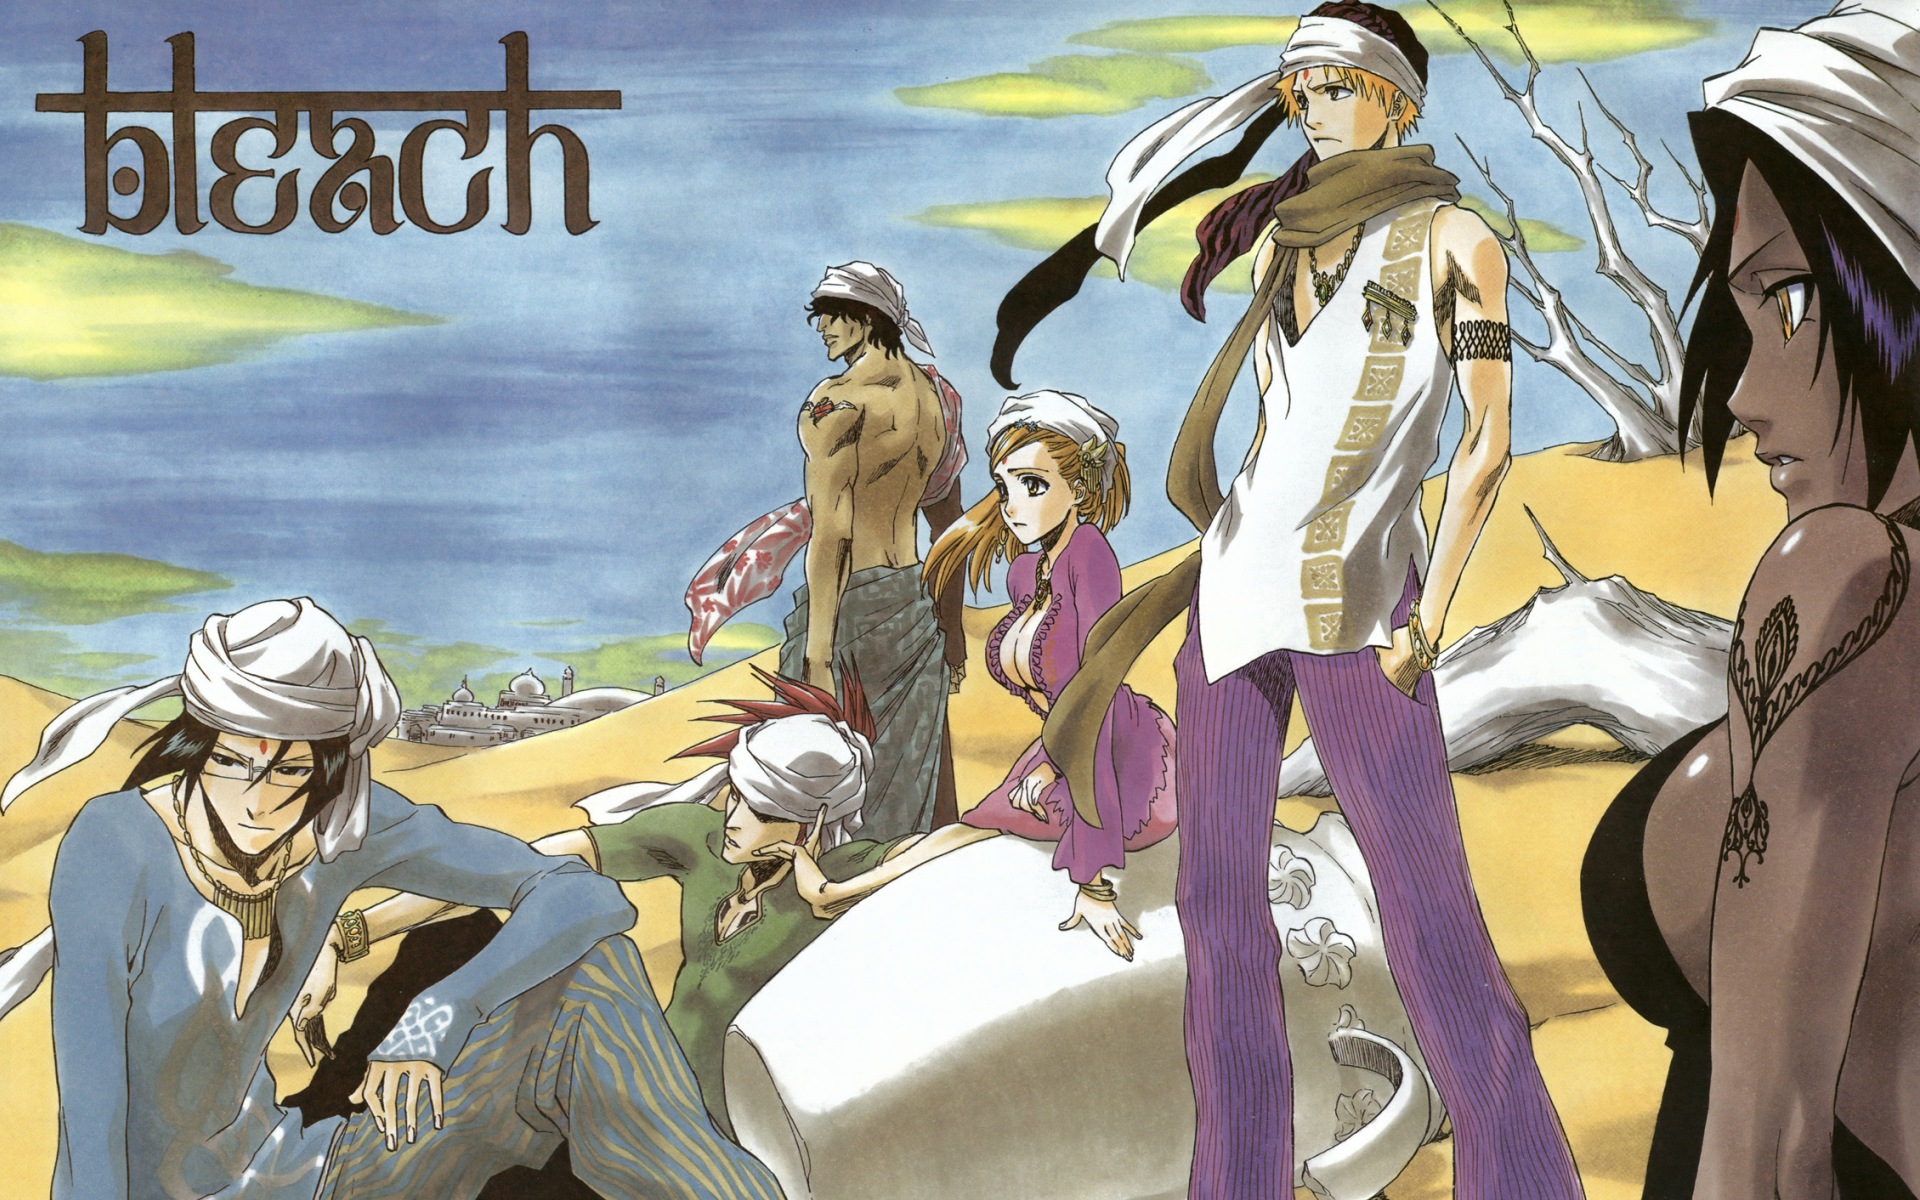 Group of main characters from the anime series Bleach